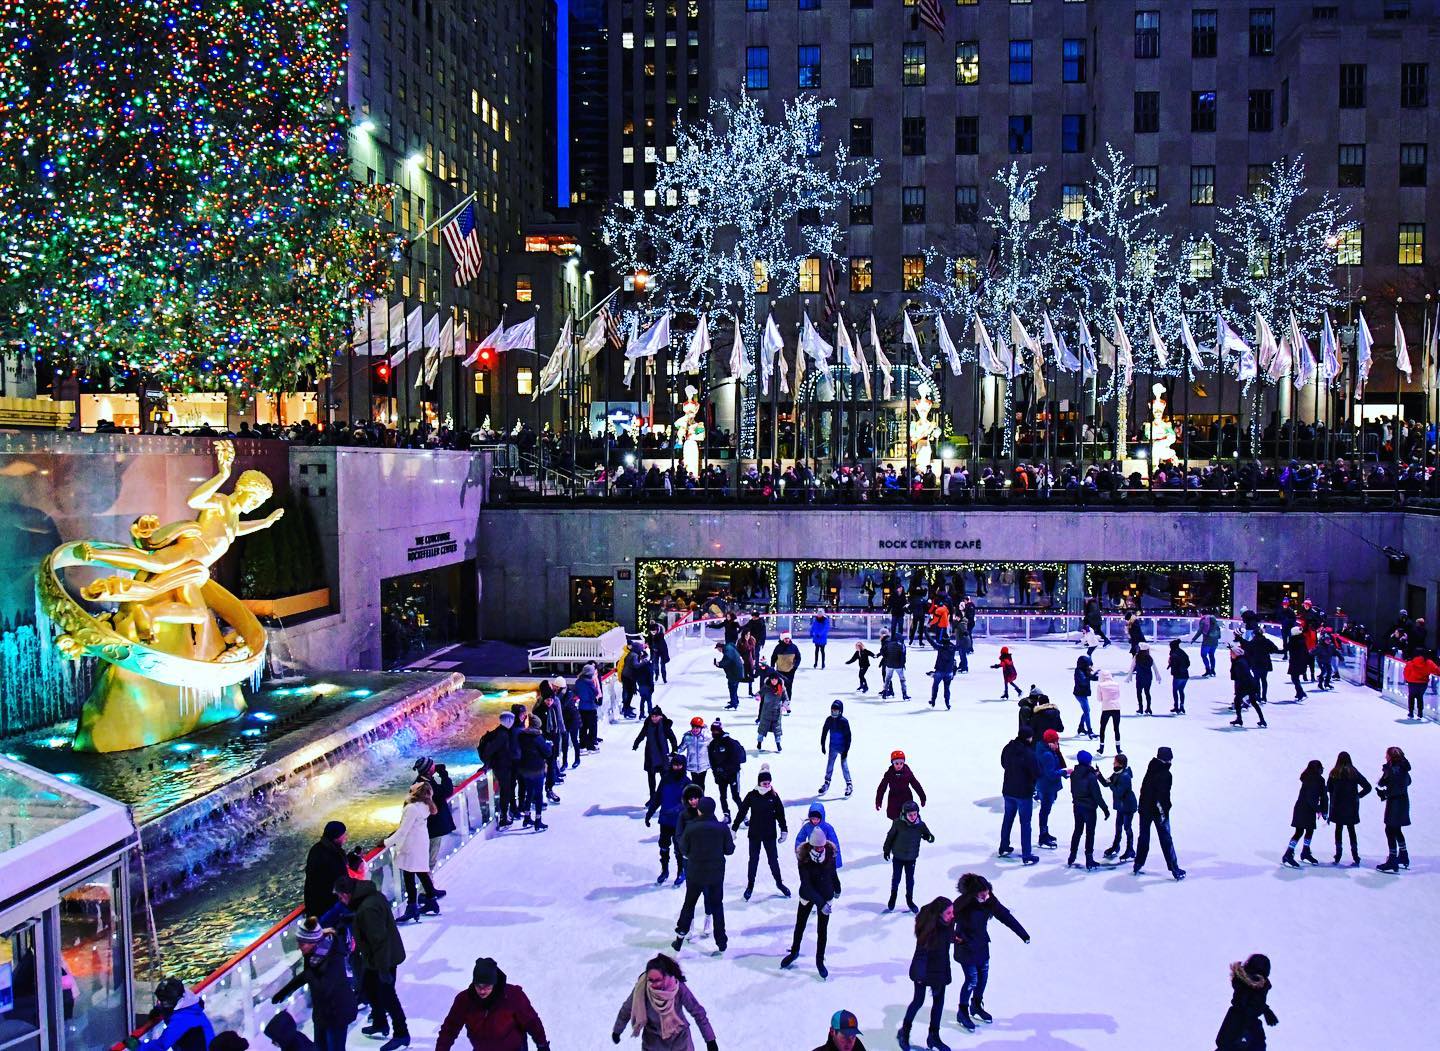 Ice Rink at Rockefeller Center, NYC, New York
Sometimes expectations of a place are too high and the reality is disappointing. Do you know that too? Which place in the USA could not be fulfilled your expectations?
We felt that way about the famous ice skating rink at Rockefeller Center. In our imagination the rink was much bigger. The ice rink is so tiny. If you really want to skate, go for Wollmann rink in Central Park.

#usa #usatravel #usatravels #newyork #nyc #icerink #iceskating #christmasnyc #christmasny #rockefellercenter #citytrip #citytravel #citytrips #eisenbahn #famousplaces #rockinaroundthechristmastree #manhattan #newyorkcity #newyorknewyork #bigcityofdreams #cityphotography #citylove #citylovers #nyclove #newyork_ig #travelphotography #travelblog #travelblogger #travelbloggers #reiseblogger